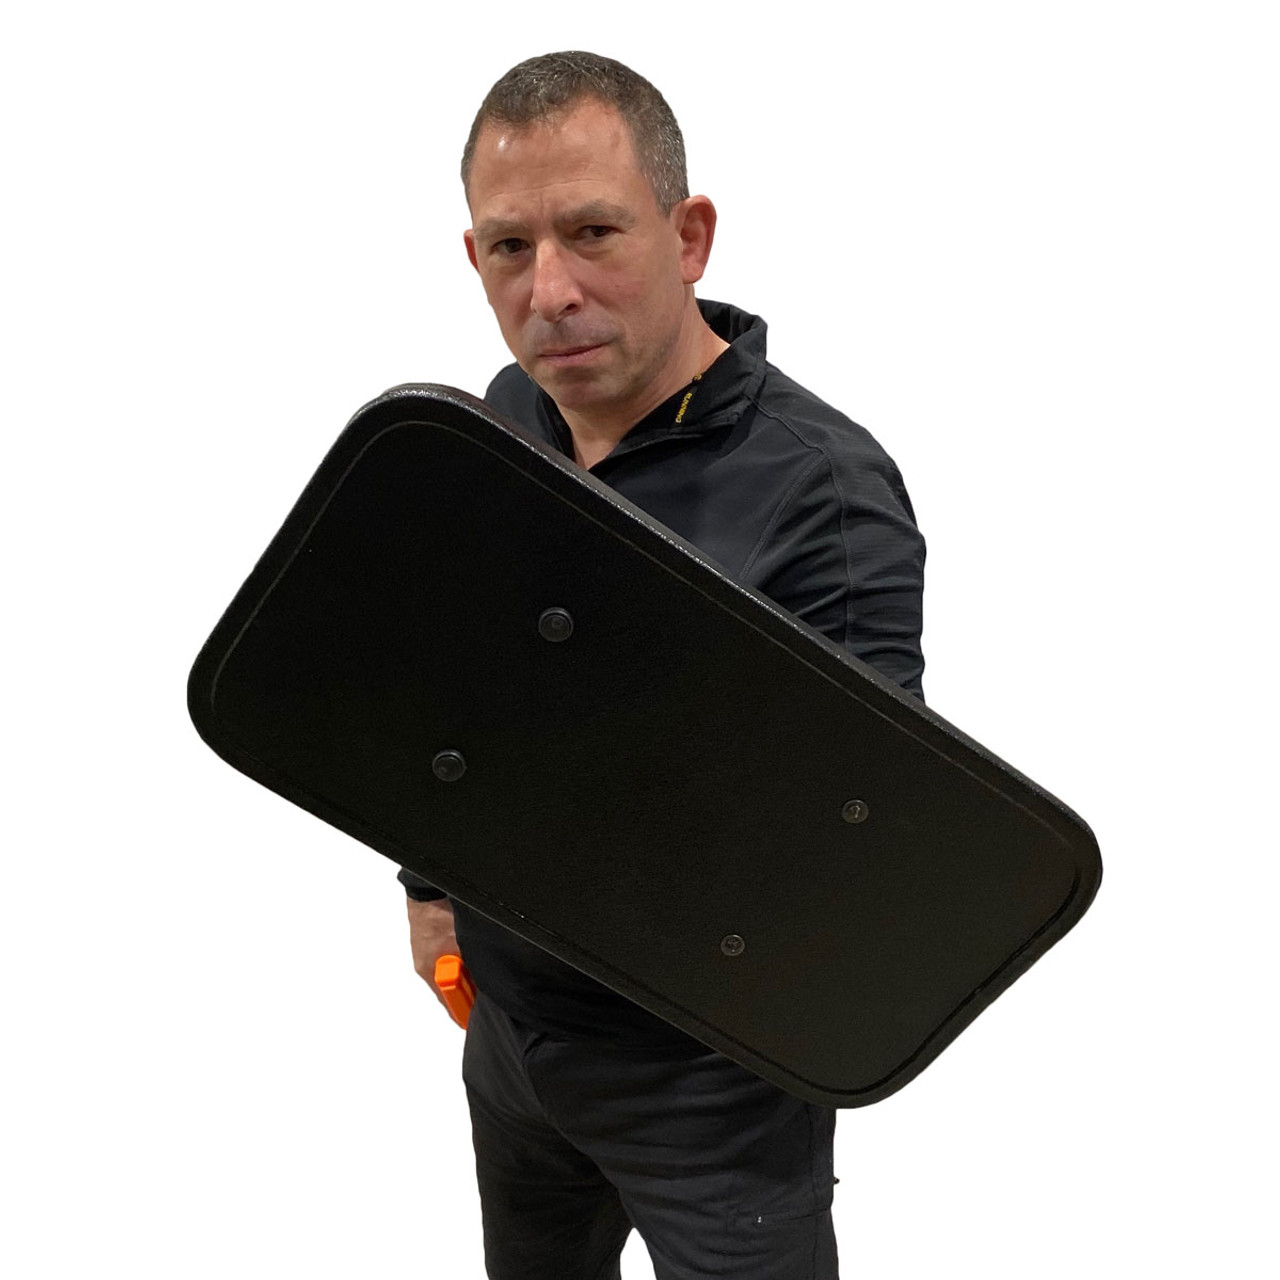 5 Things to Know When Buying Ballistic Shields